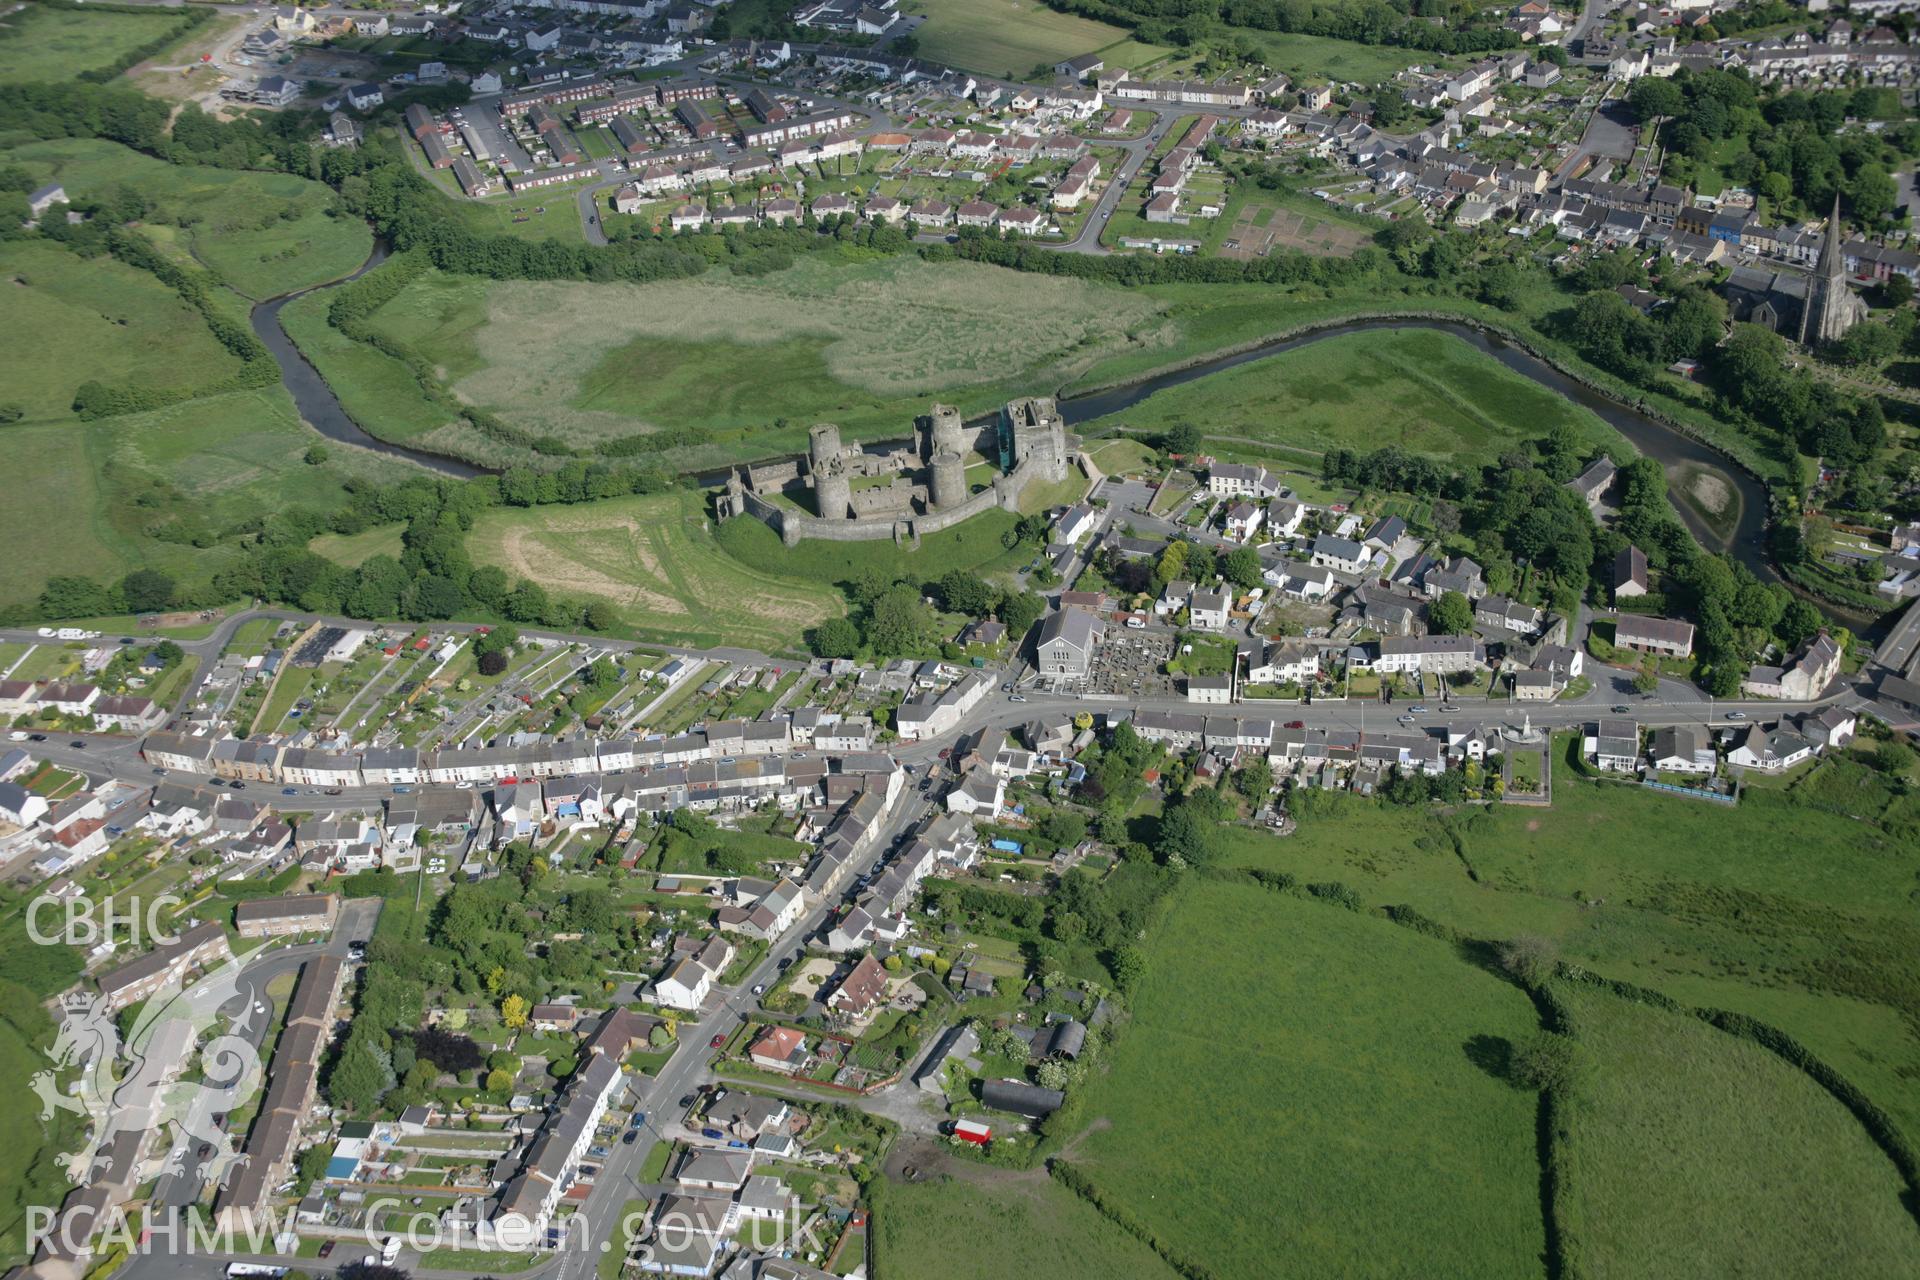 RCAHMW colour oblique aerial photograph of Kidwelly Castle and part of medieval town, viewed from north-west Taken on 09 June 2005 by Toby Driver